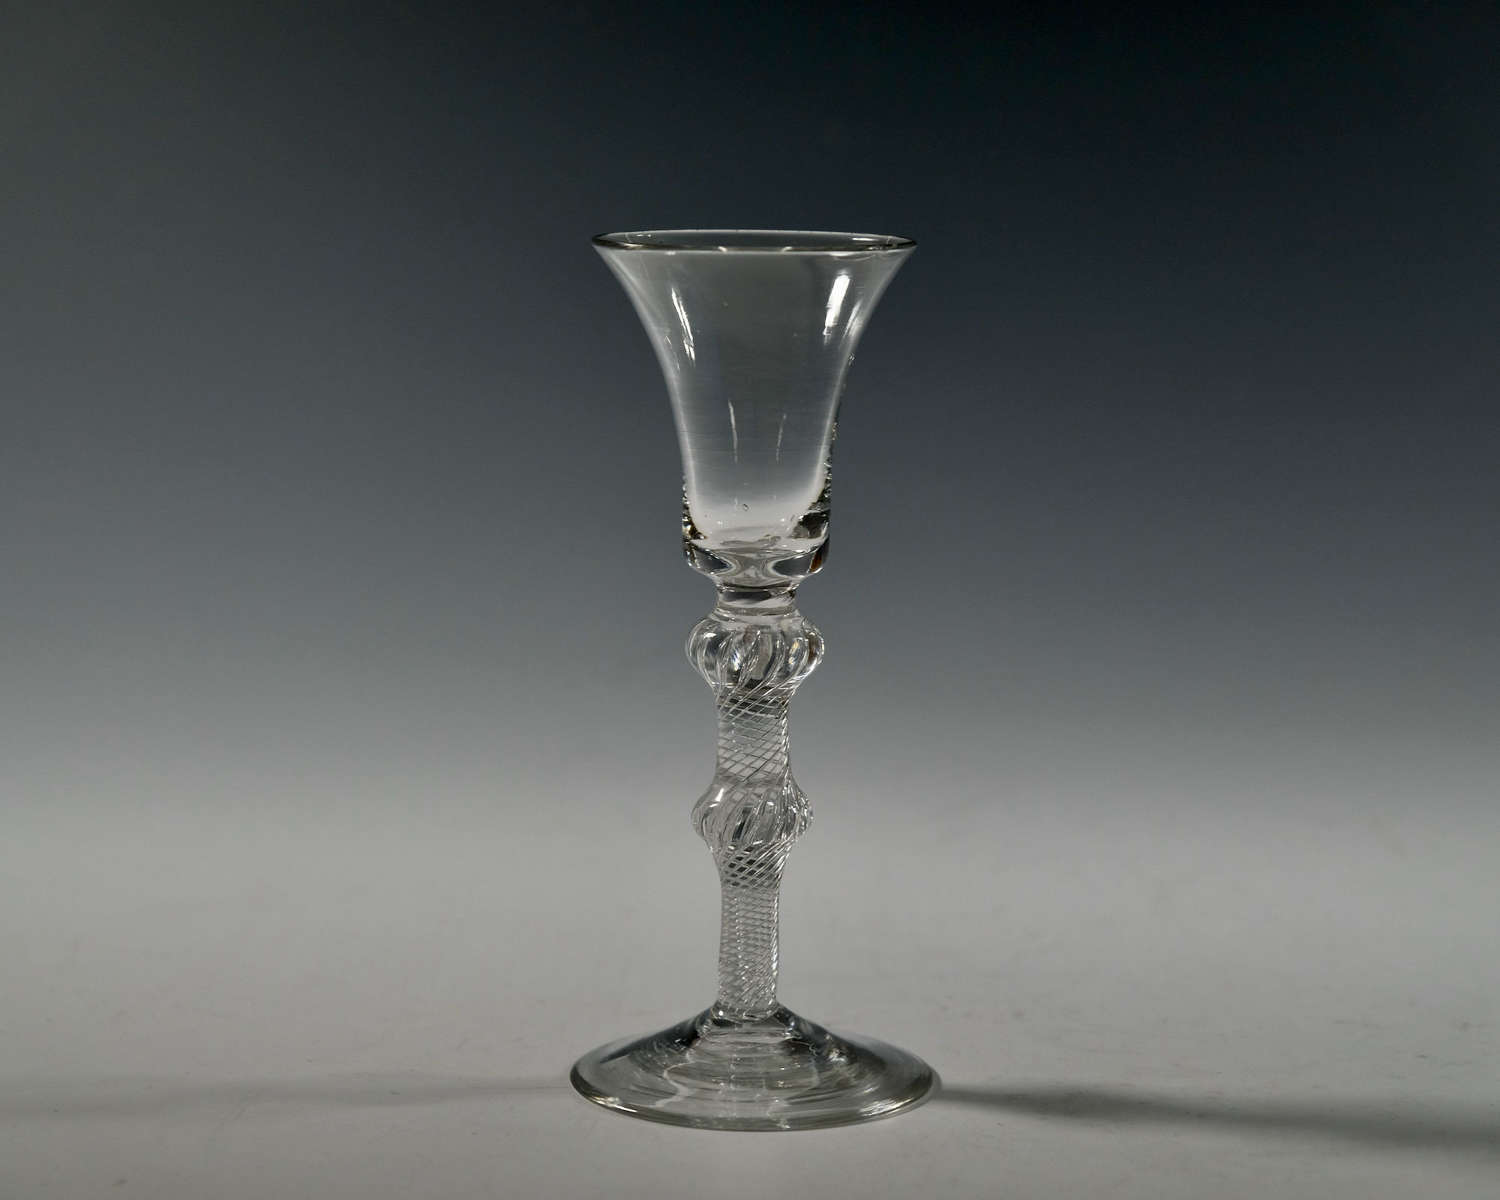 Double knopped air twist wine glass C1755